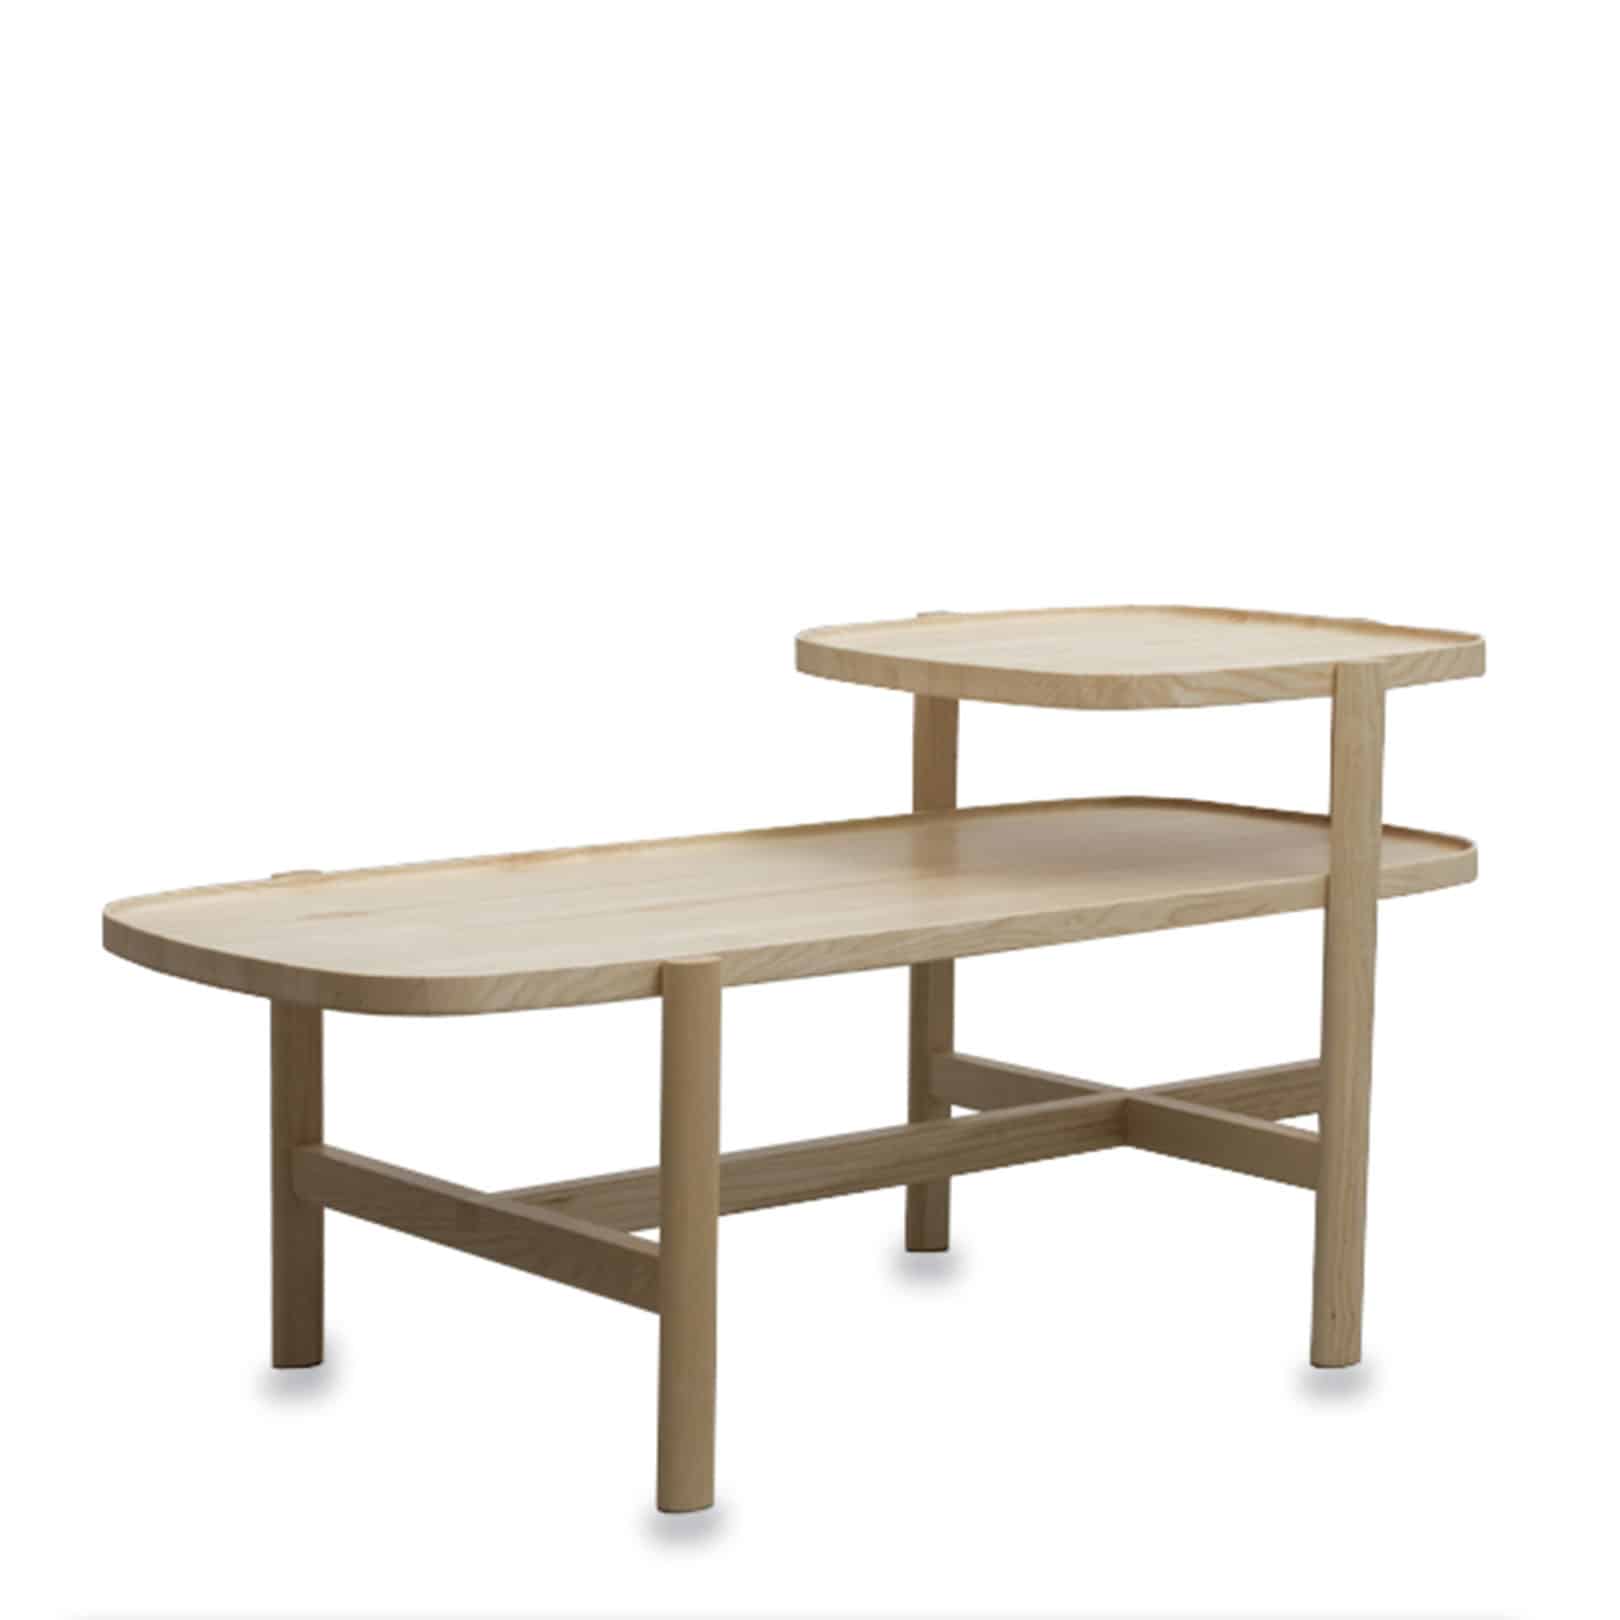 Fuse long table in natural ash beige